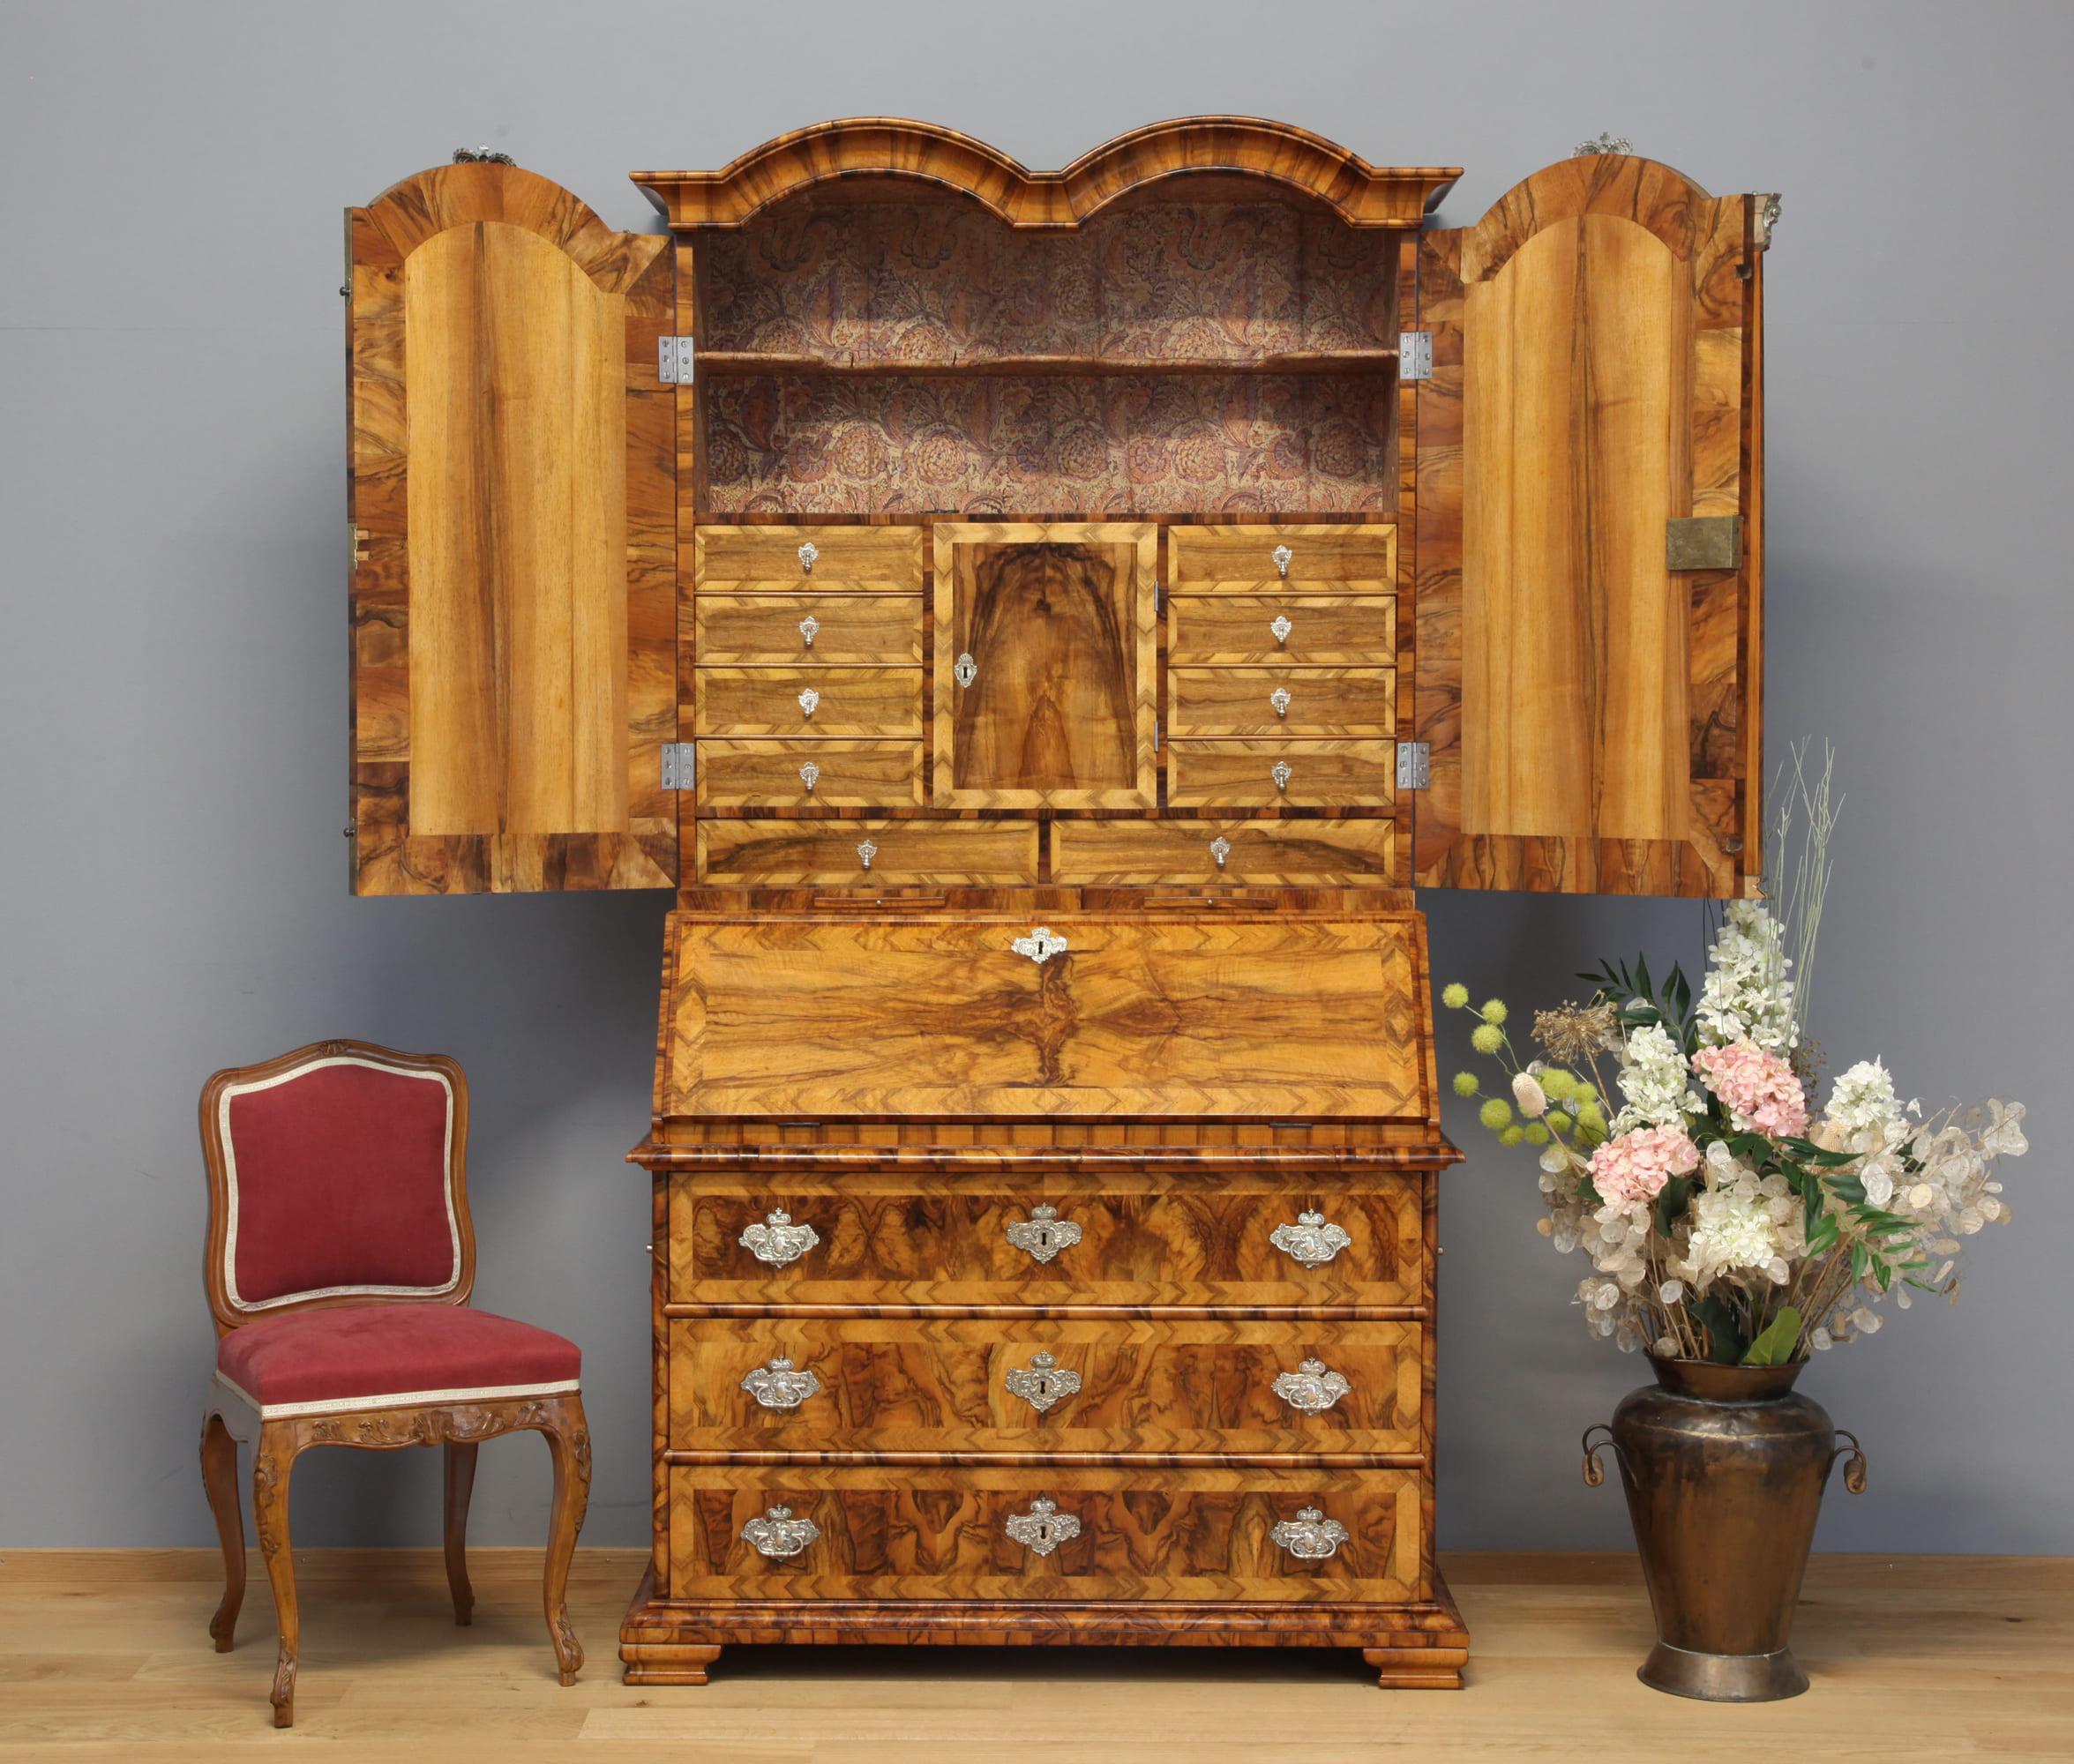 Two-piece baroque secretary with mirrored doors, exceptional original silvered fittings with numerous princely crowns, walnut saw veneer on softwood, Thuringia circa 1730/35. This secretary comes from princely property, was made in very high